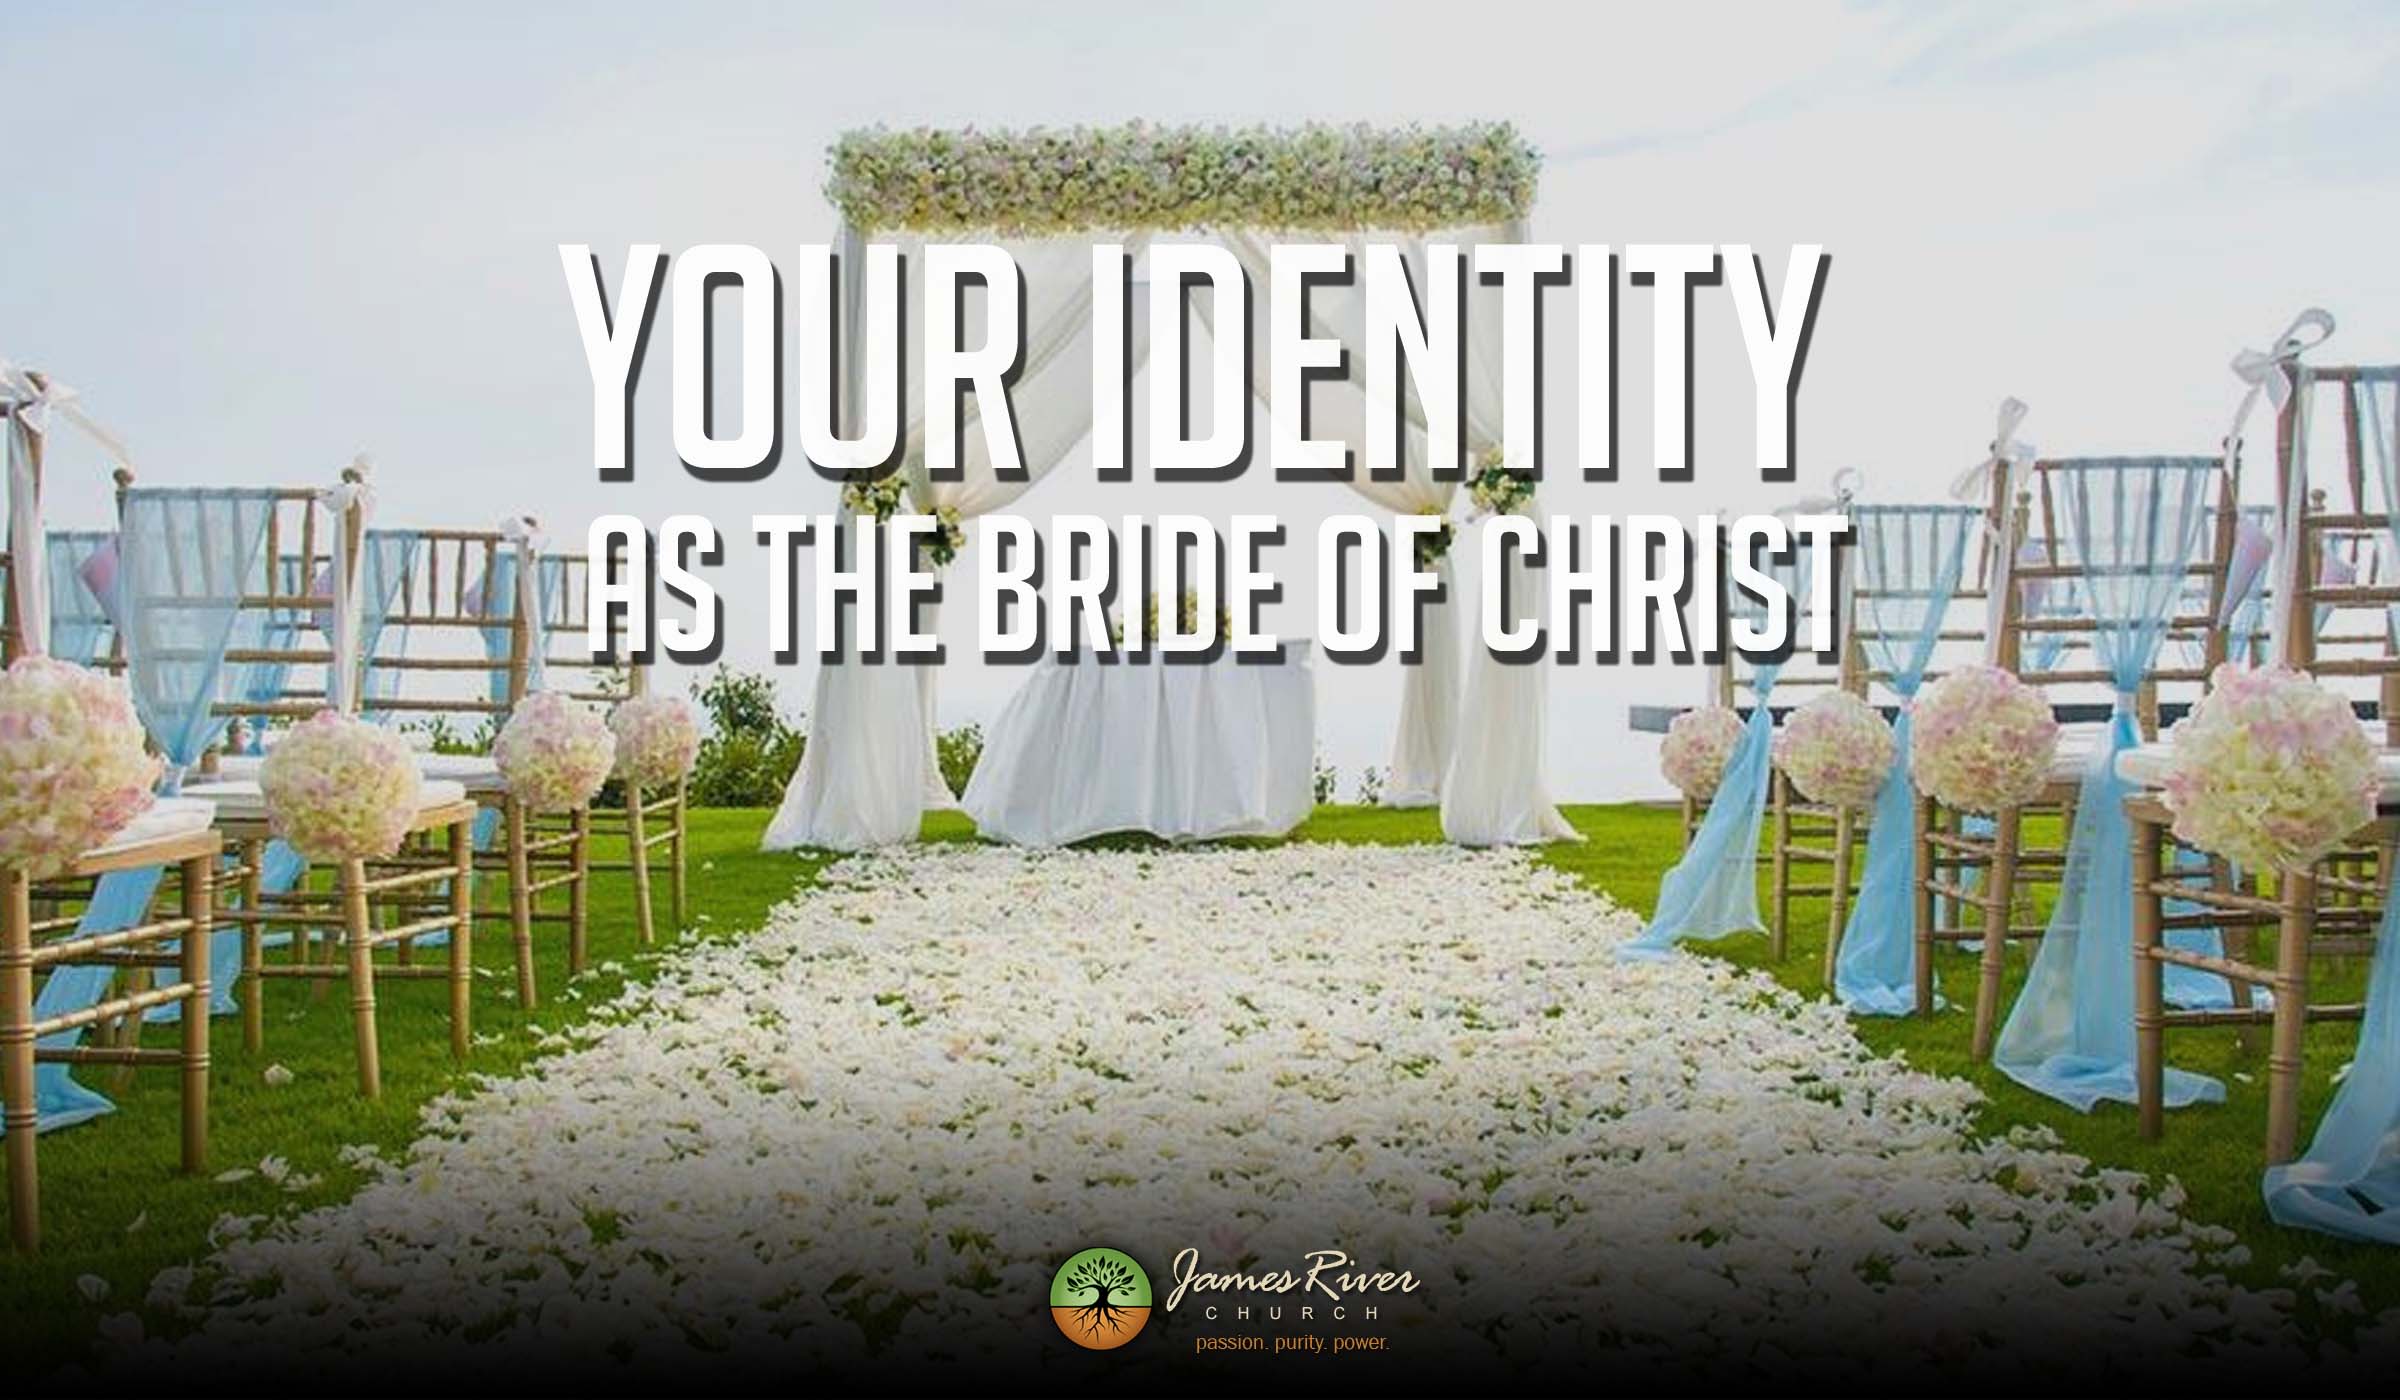 Your Identity as the Bride of Christ